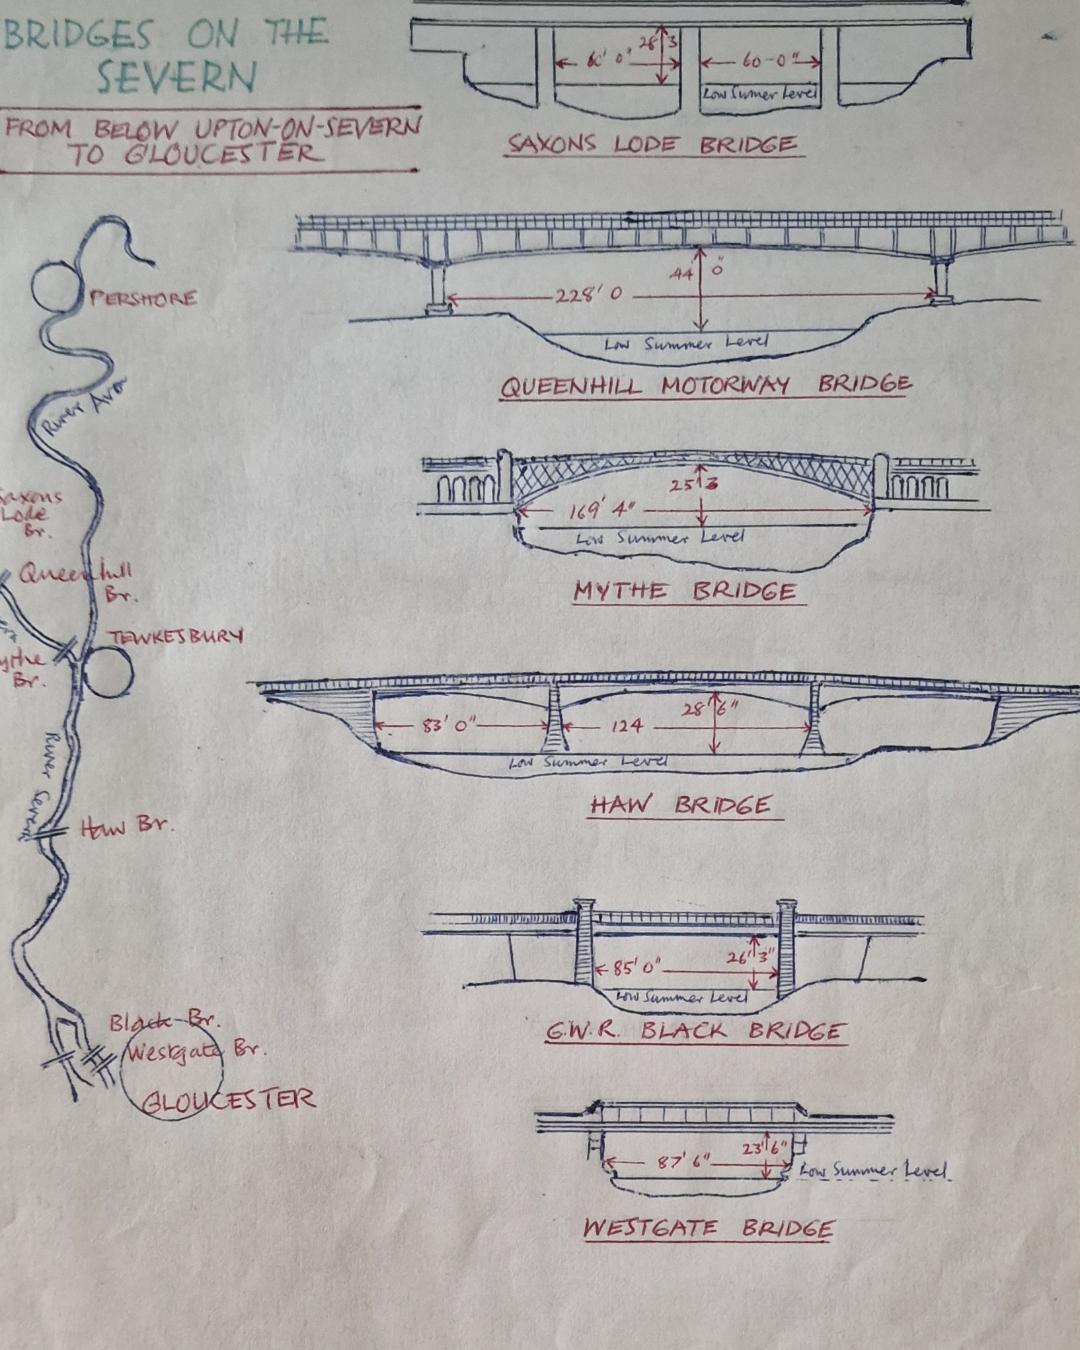 Sketch drawing of Bridges on the Severn 